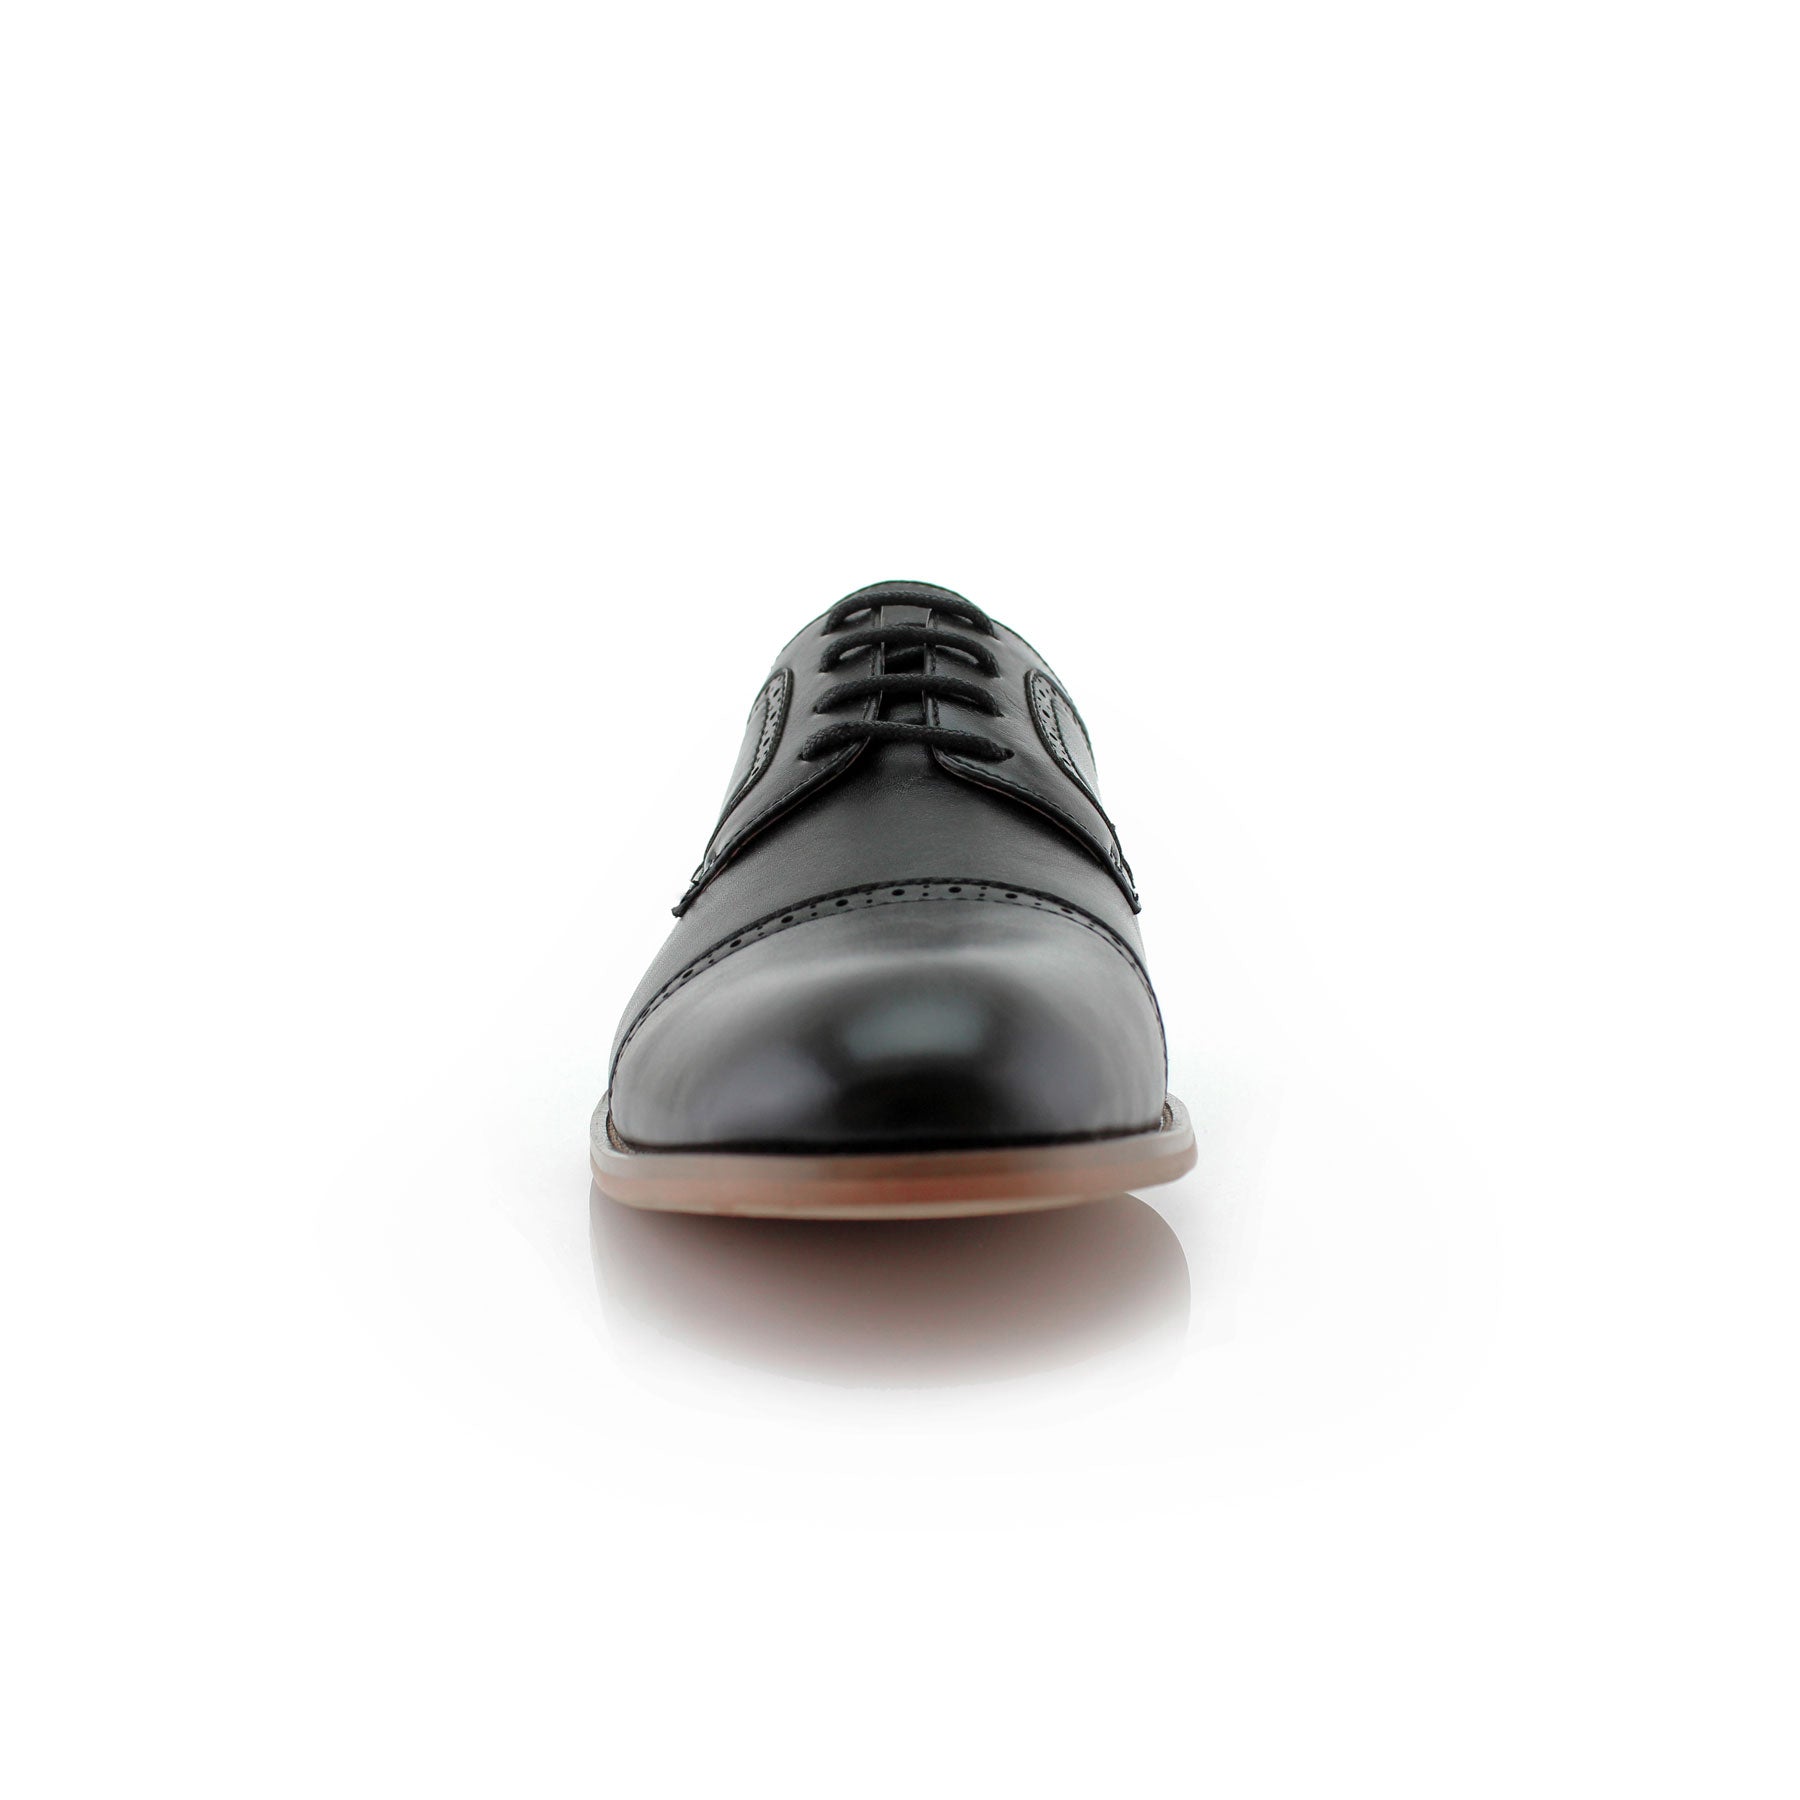 Brogue Burnished Derby Shoes | Jared by Ferro Aldo | Conal Footwear | Front Angle View